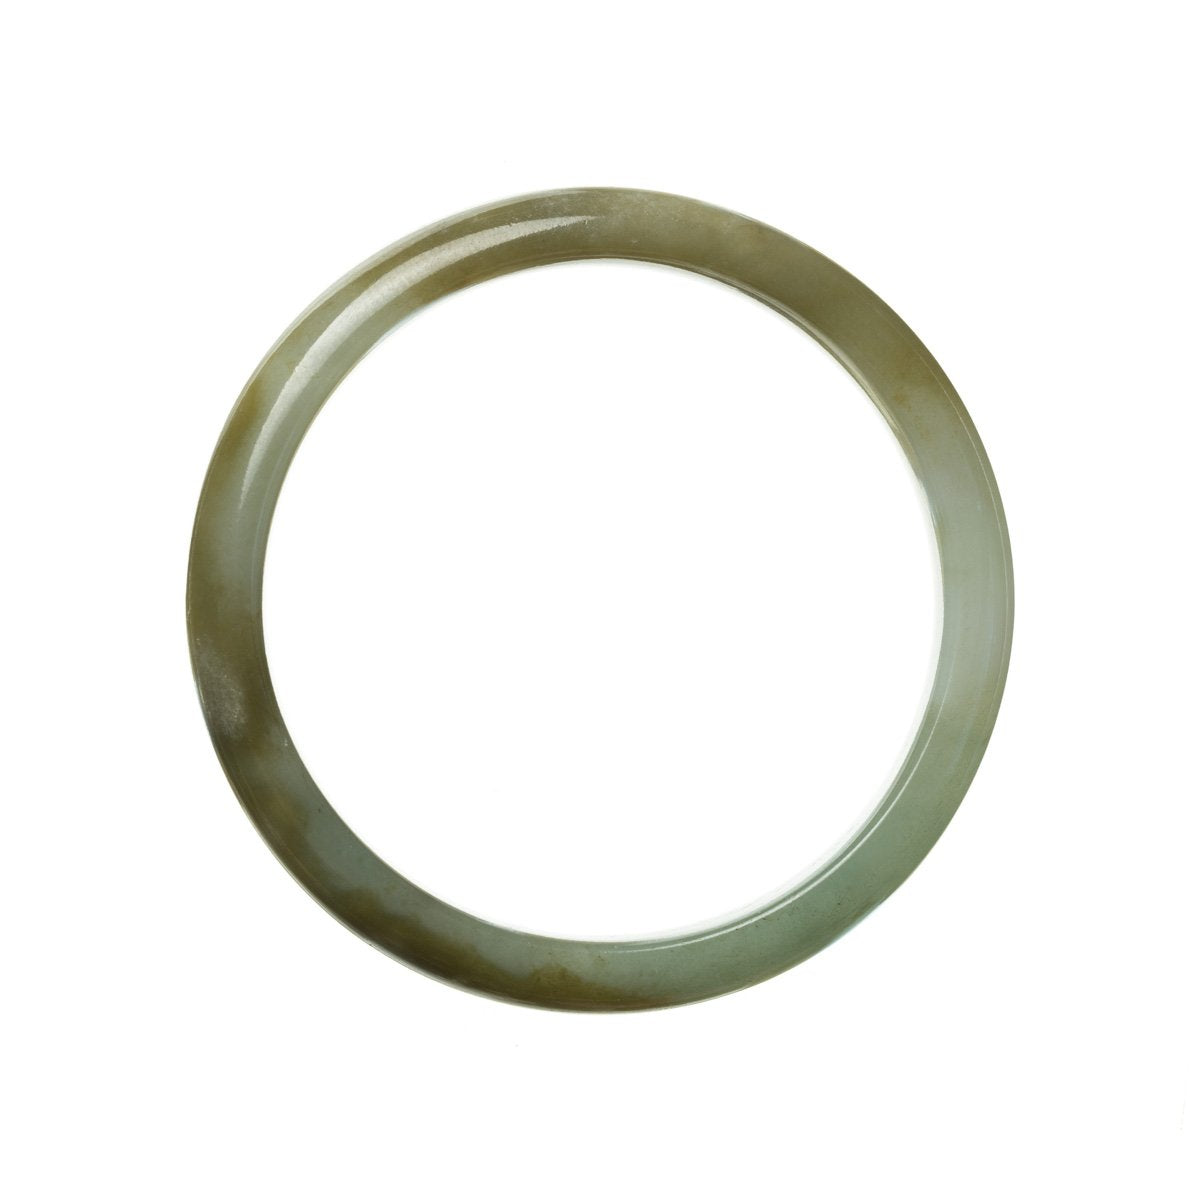 A close-up image of an authentic natural green and brown jade bangle, with a semi-round shape. The bangle has a traditional design and measures 56mm in diameter. Created by MAYS GEMS.